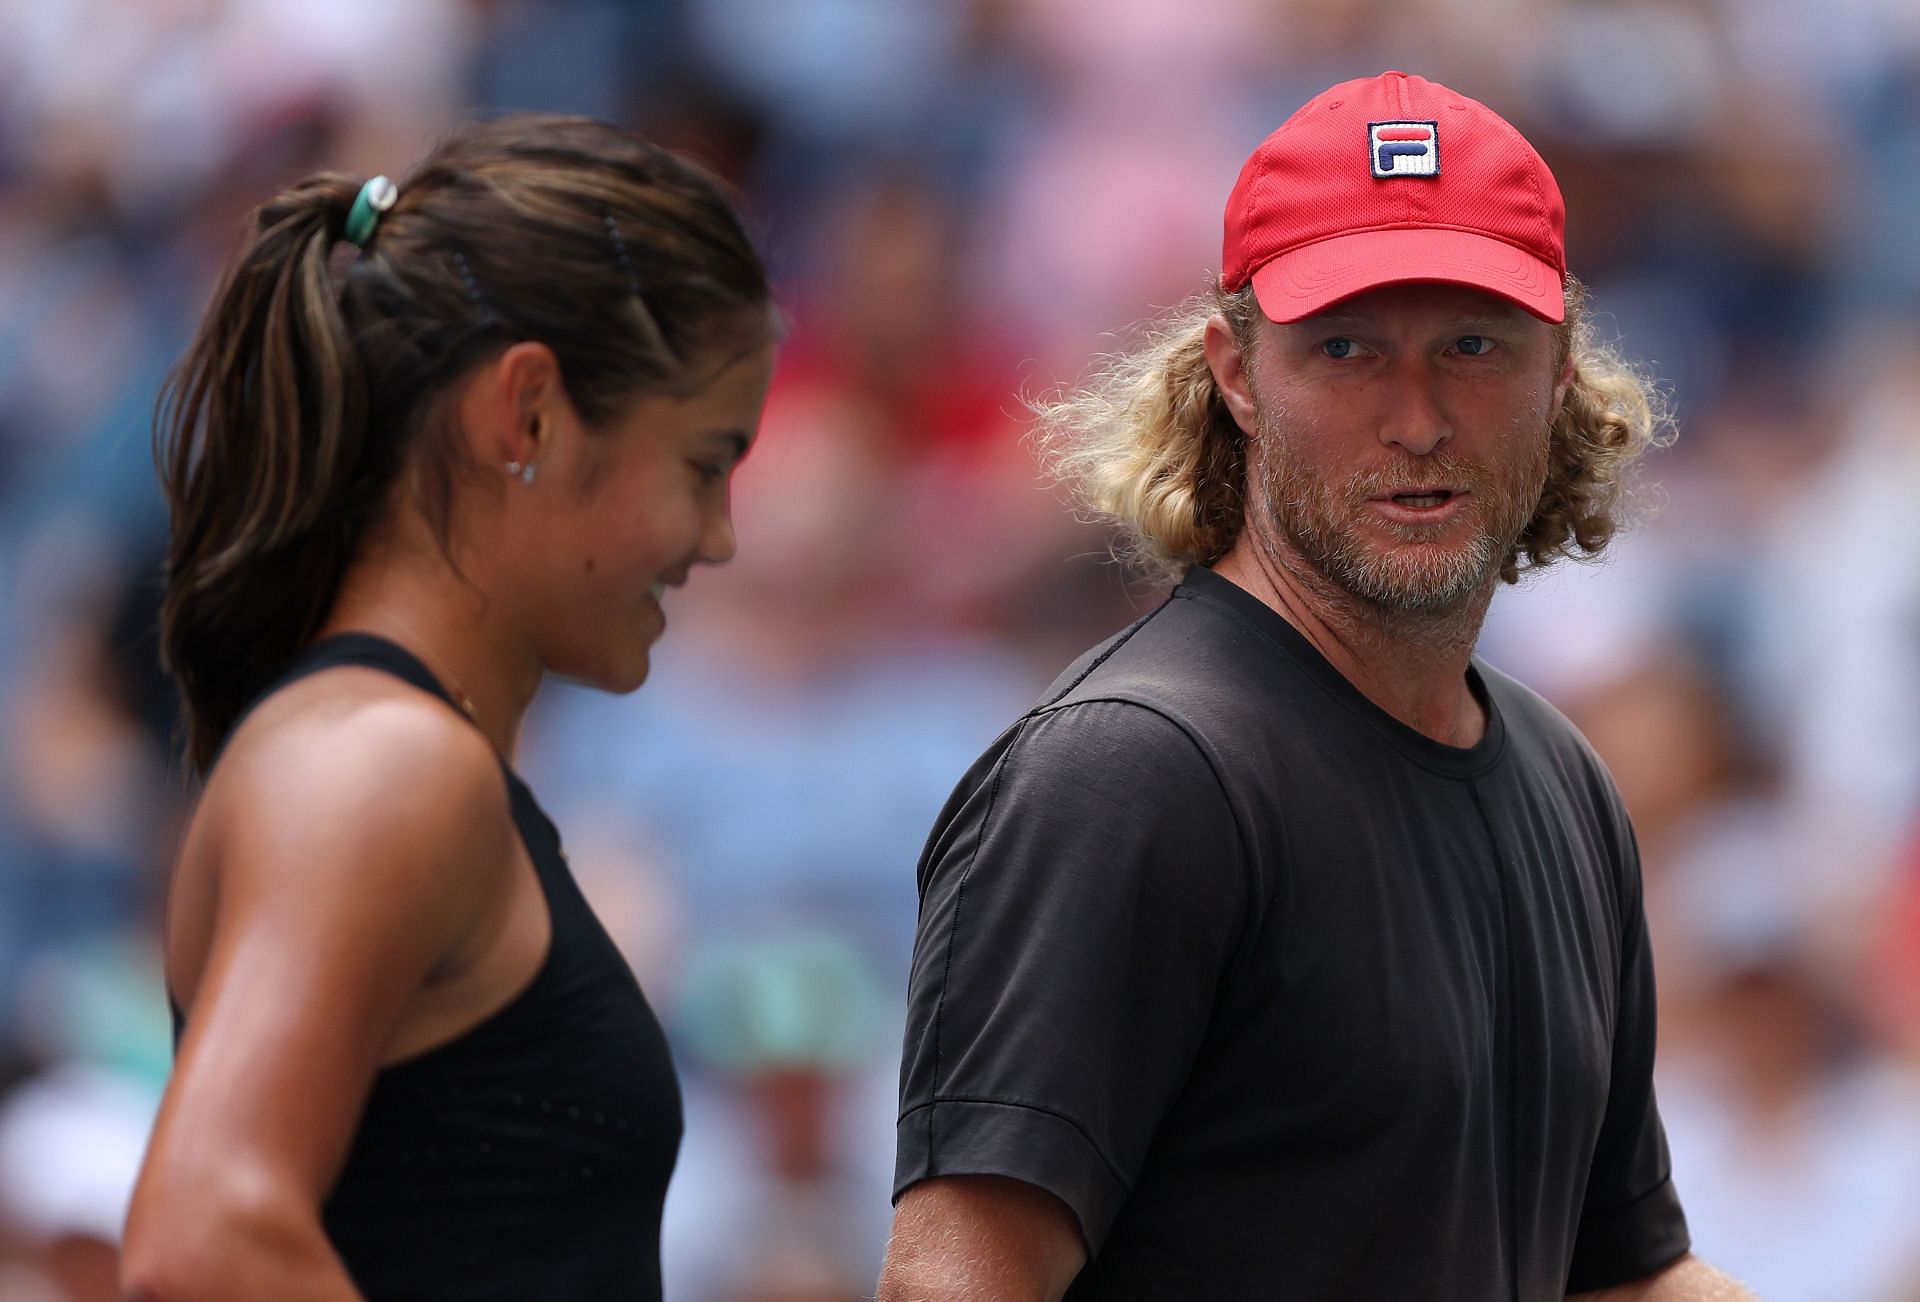 Emma Raducanu pictured with Dmitry Tursunov during the 2022 US Open.